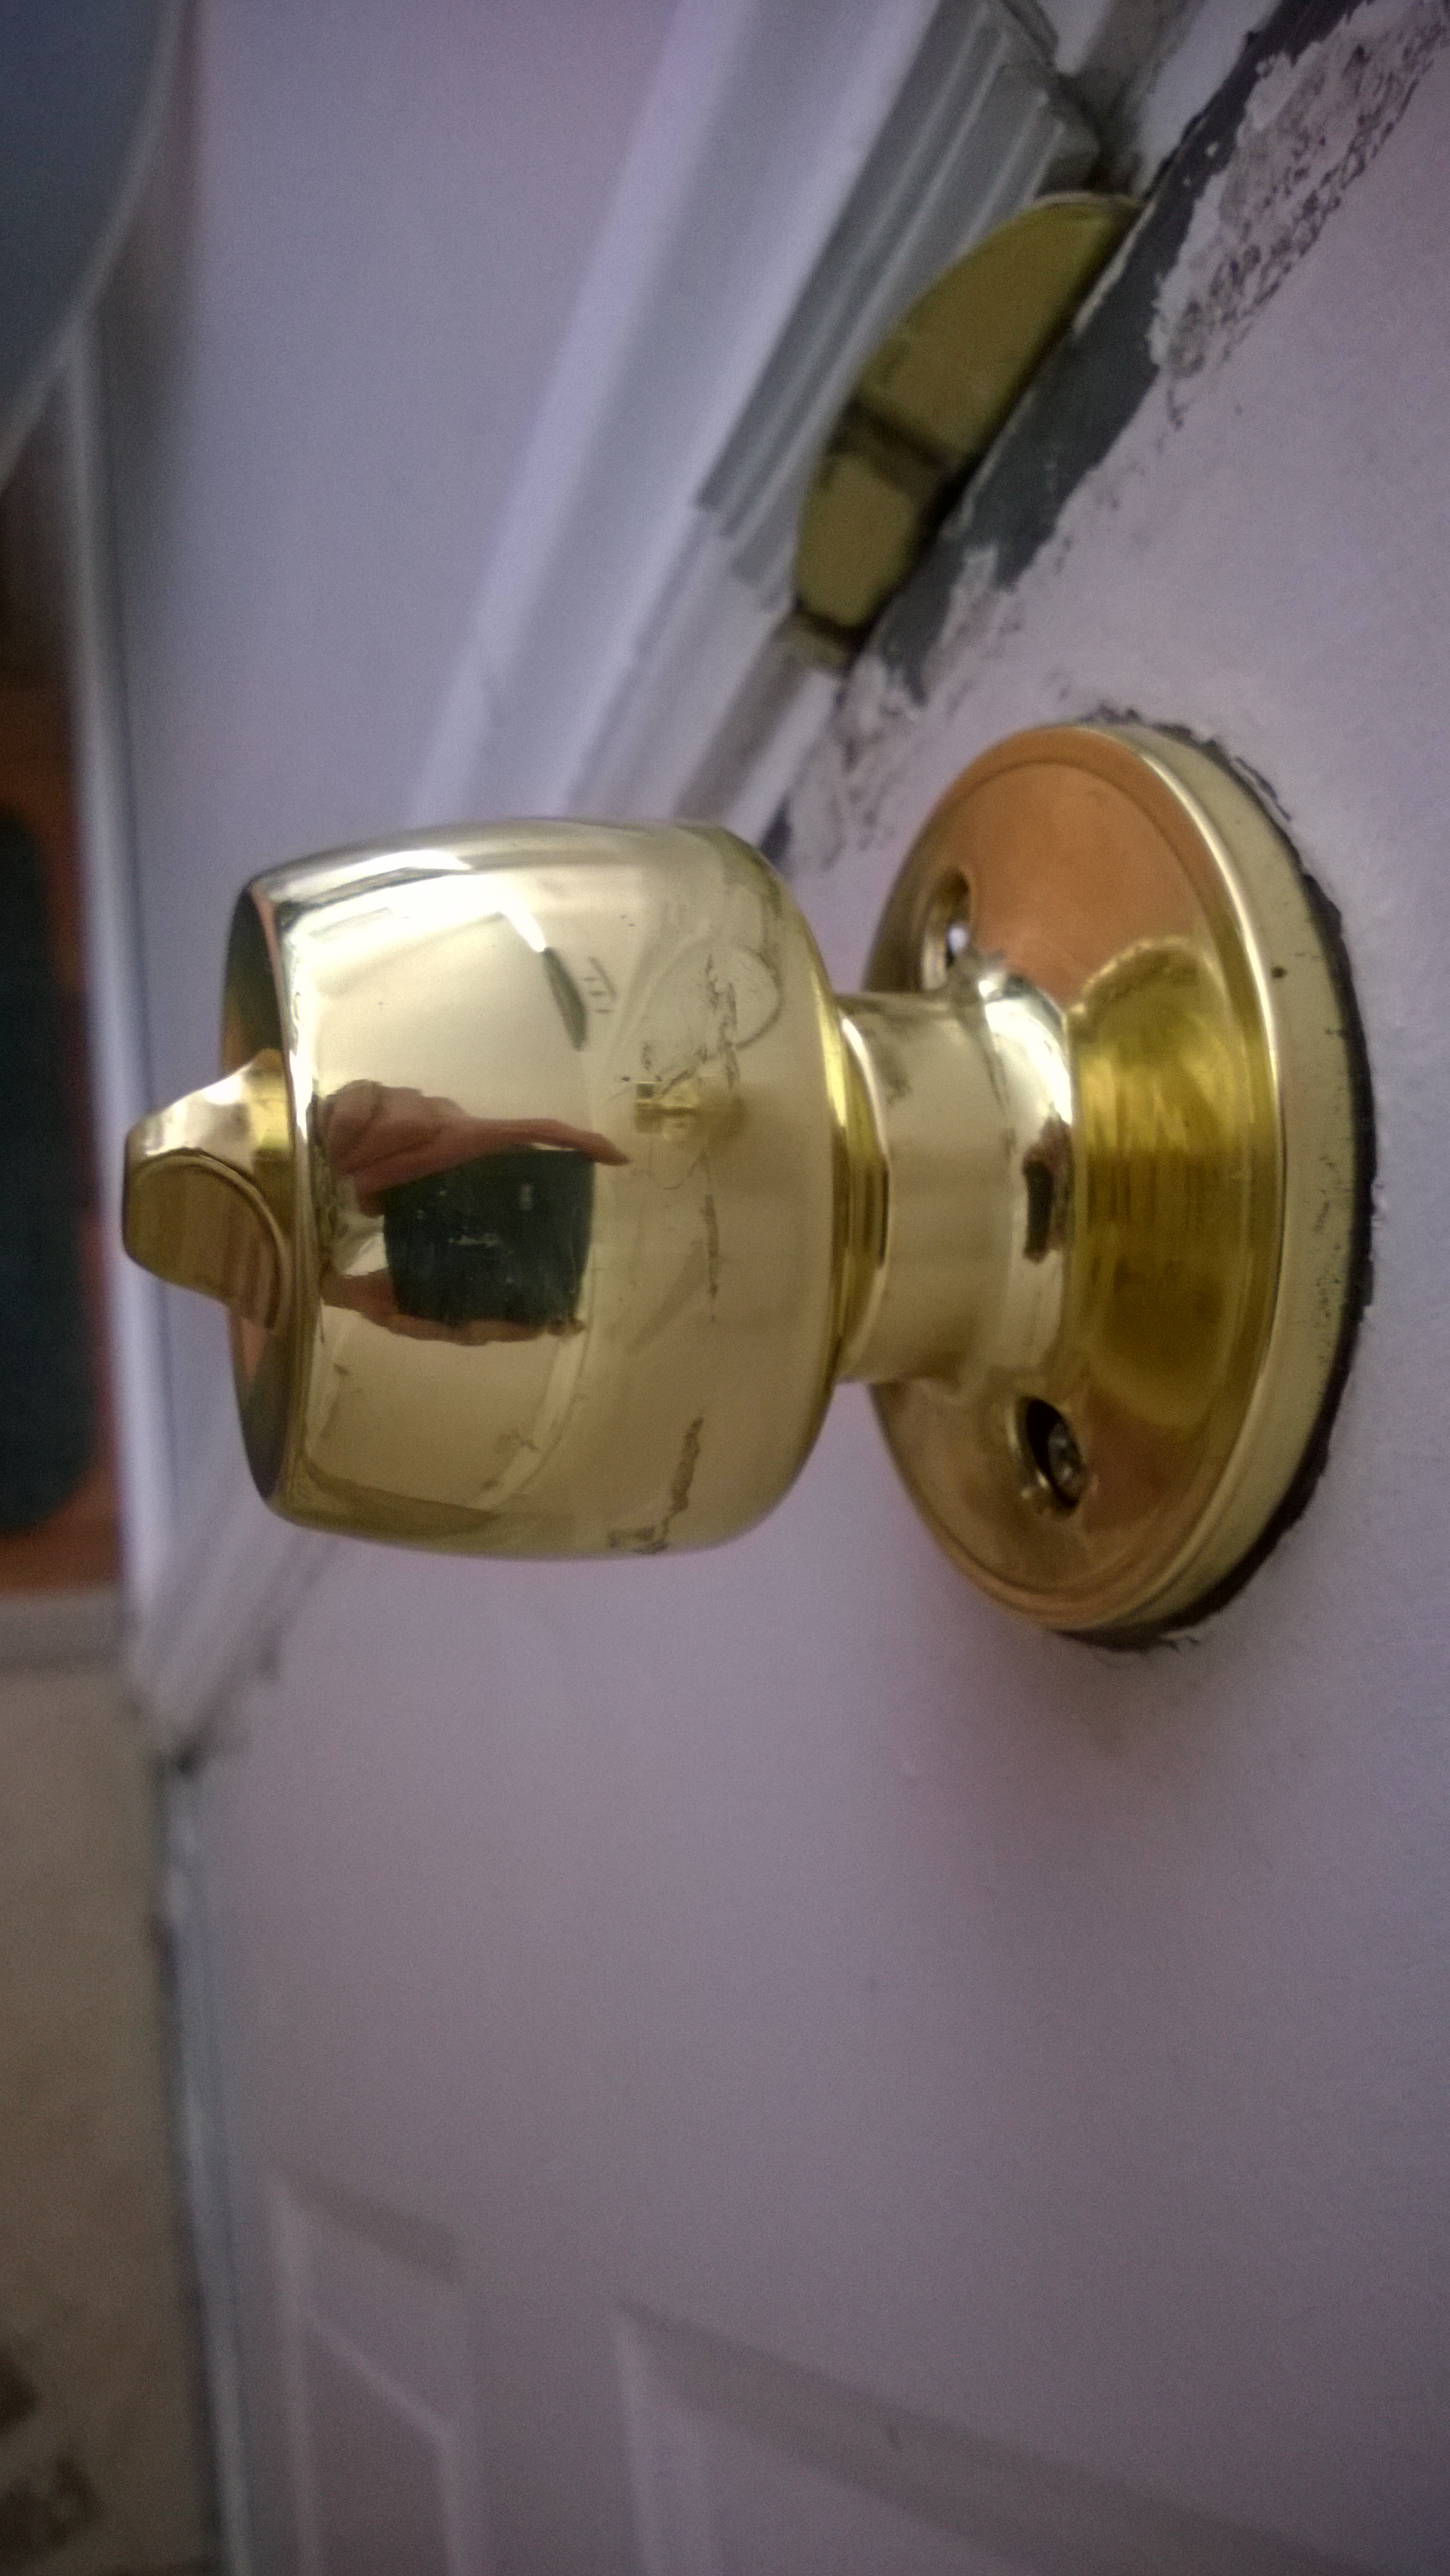 Dented and scratched locks that ND Professional installed instead of new locks